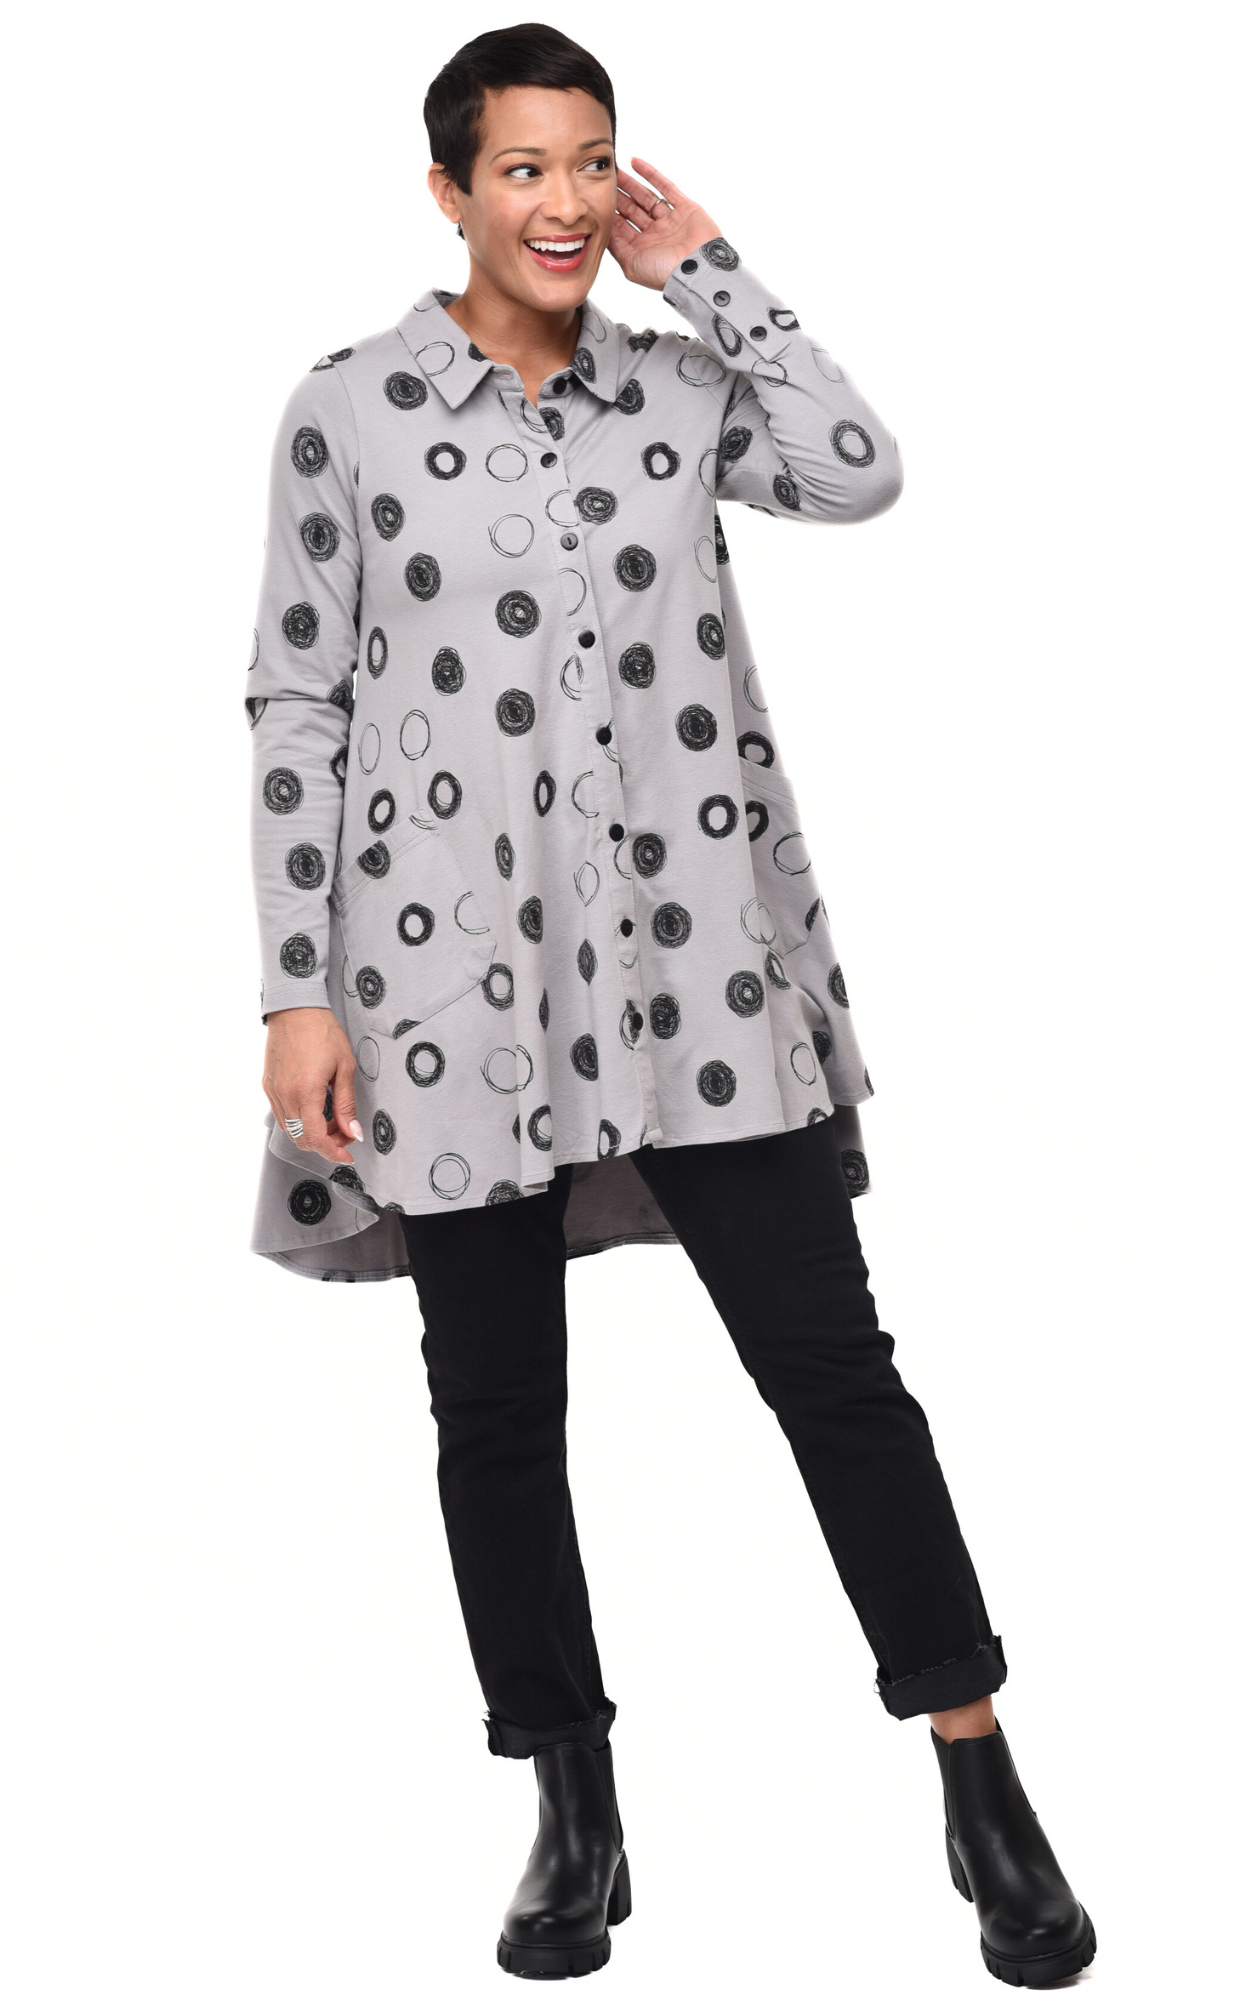 Tulip Clothing - Lauryn in Gray Crazy Circles